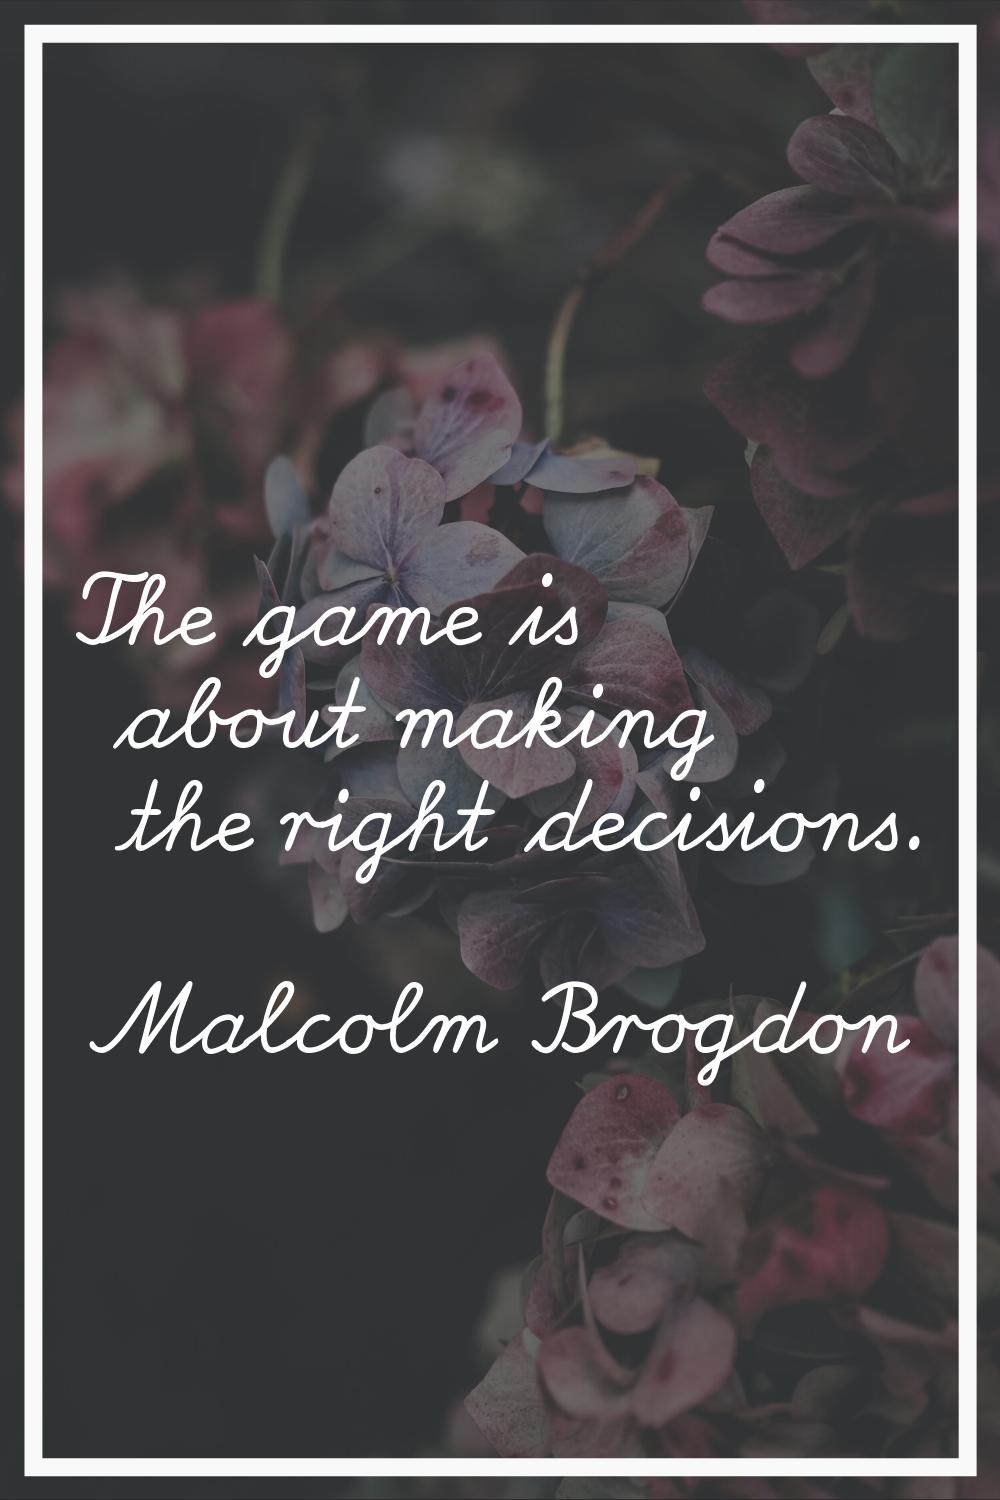 The game is about making the right decisions.